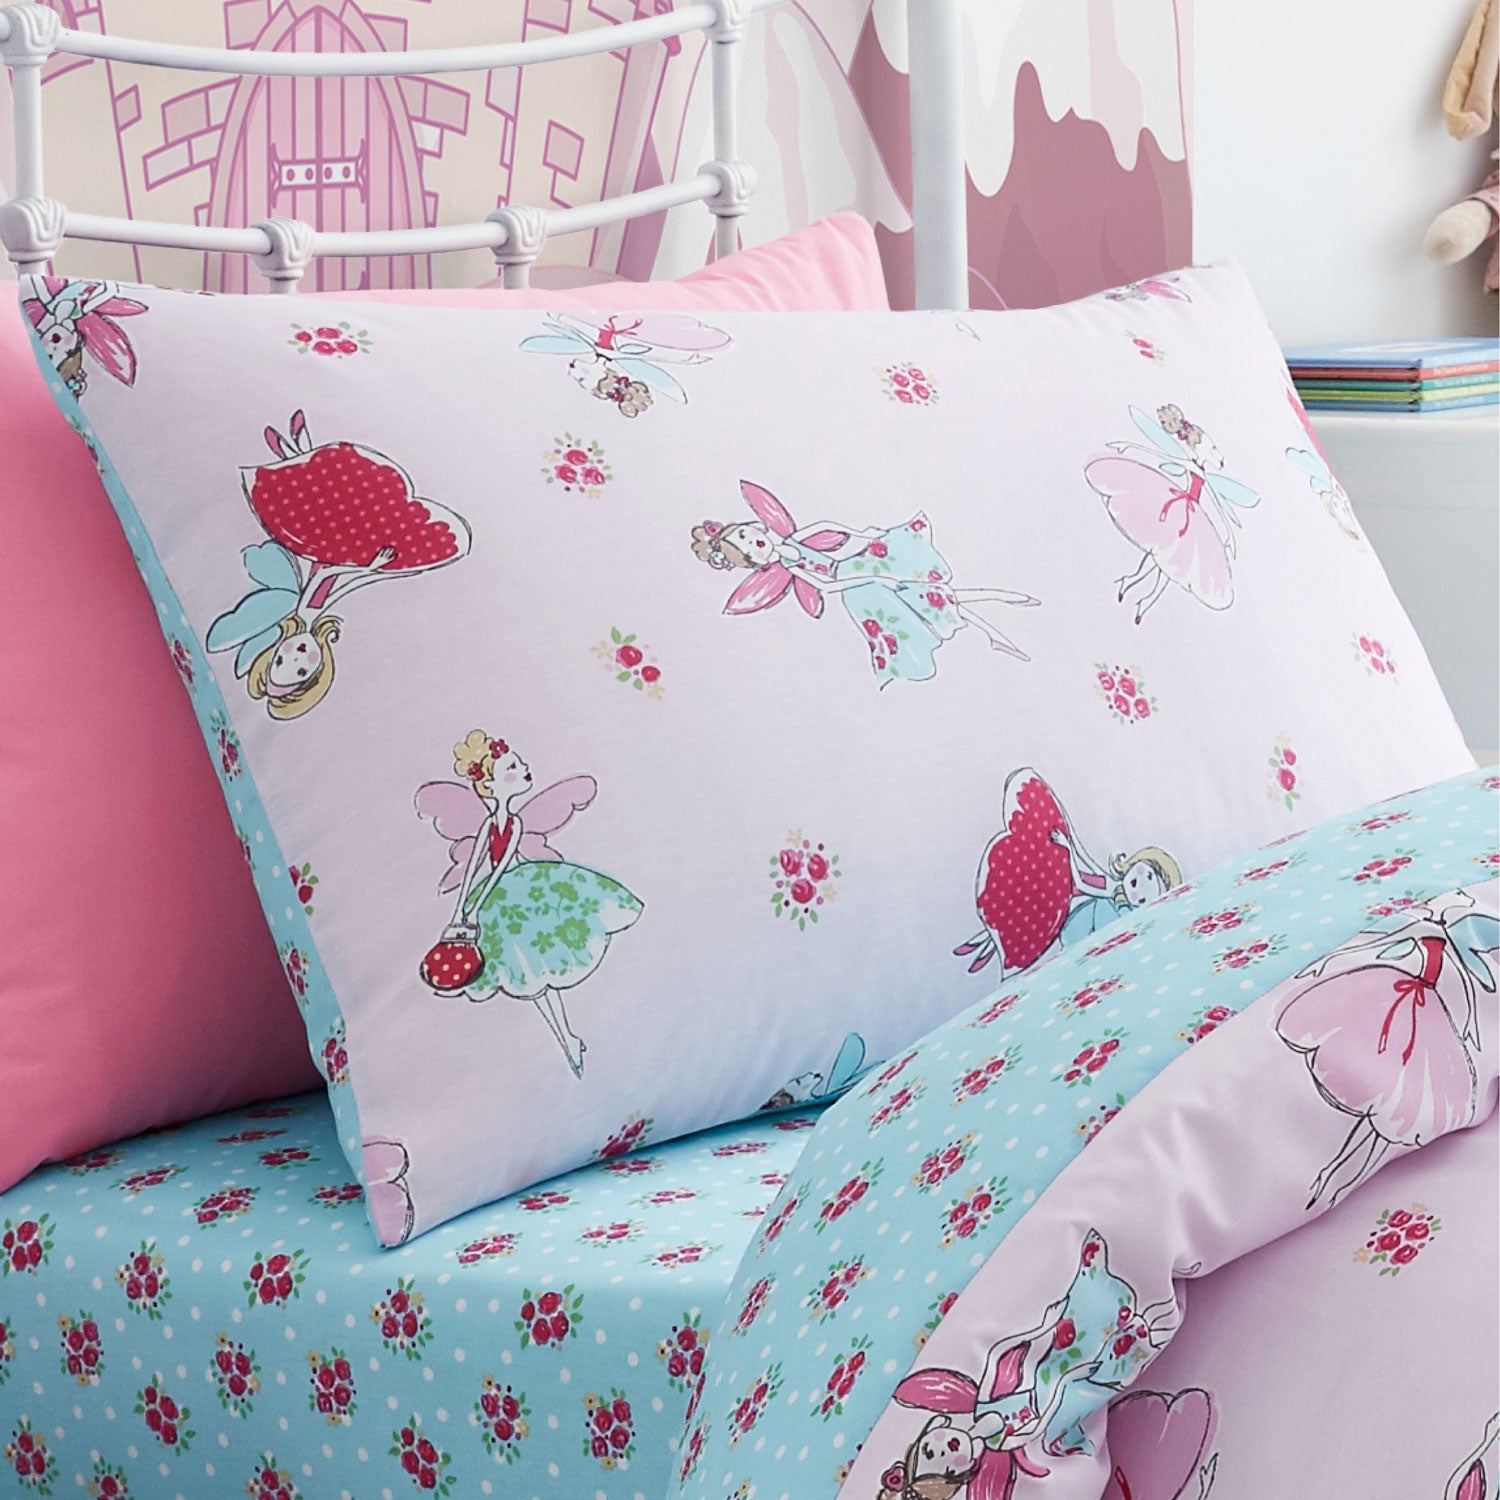  Catherine Lansfield Fairies Duvet Cover Set - Pink 2 Shaws Department Stores